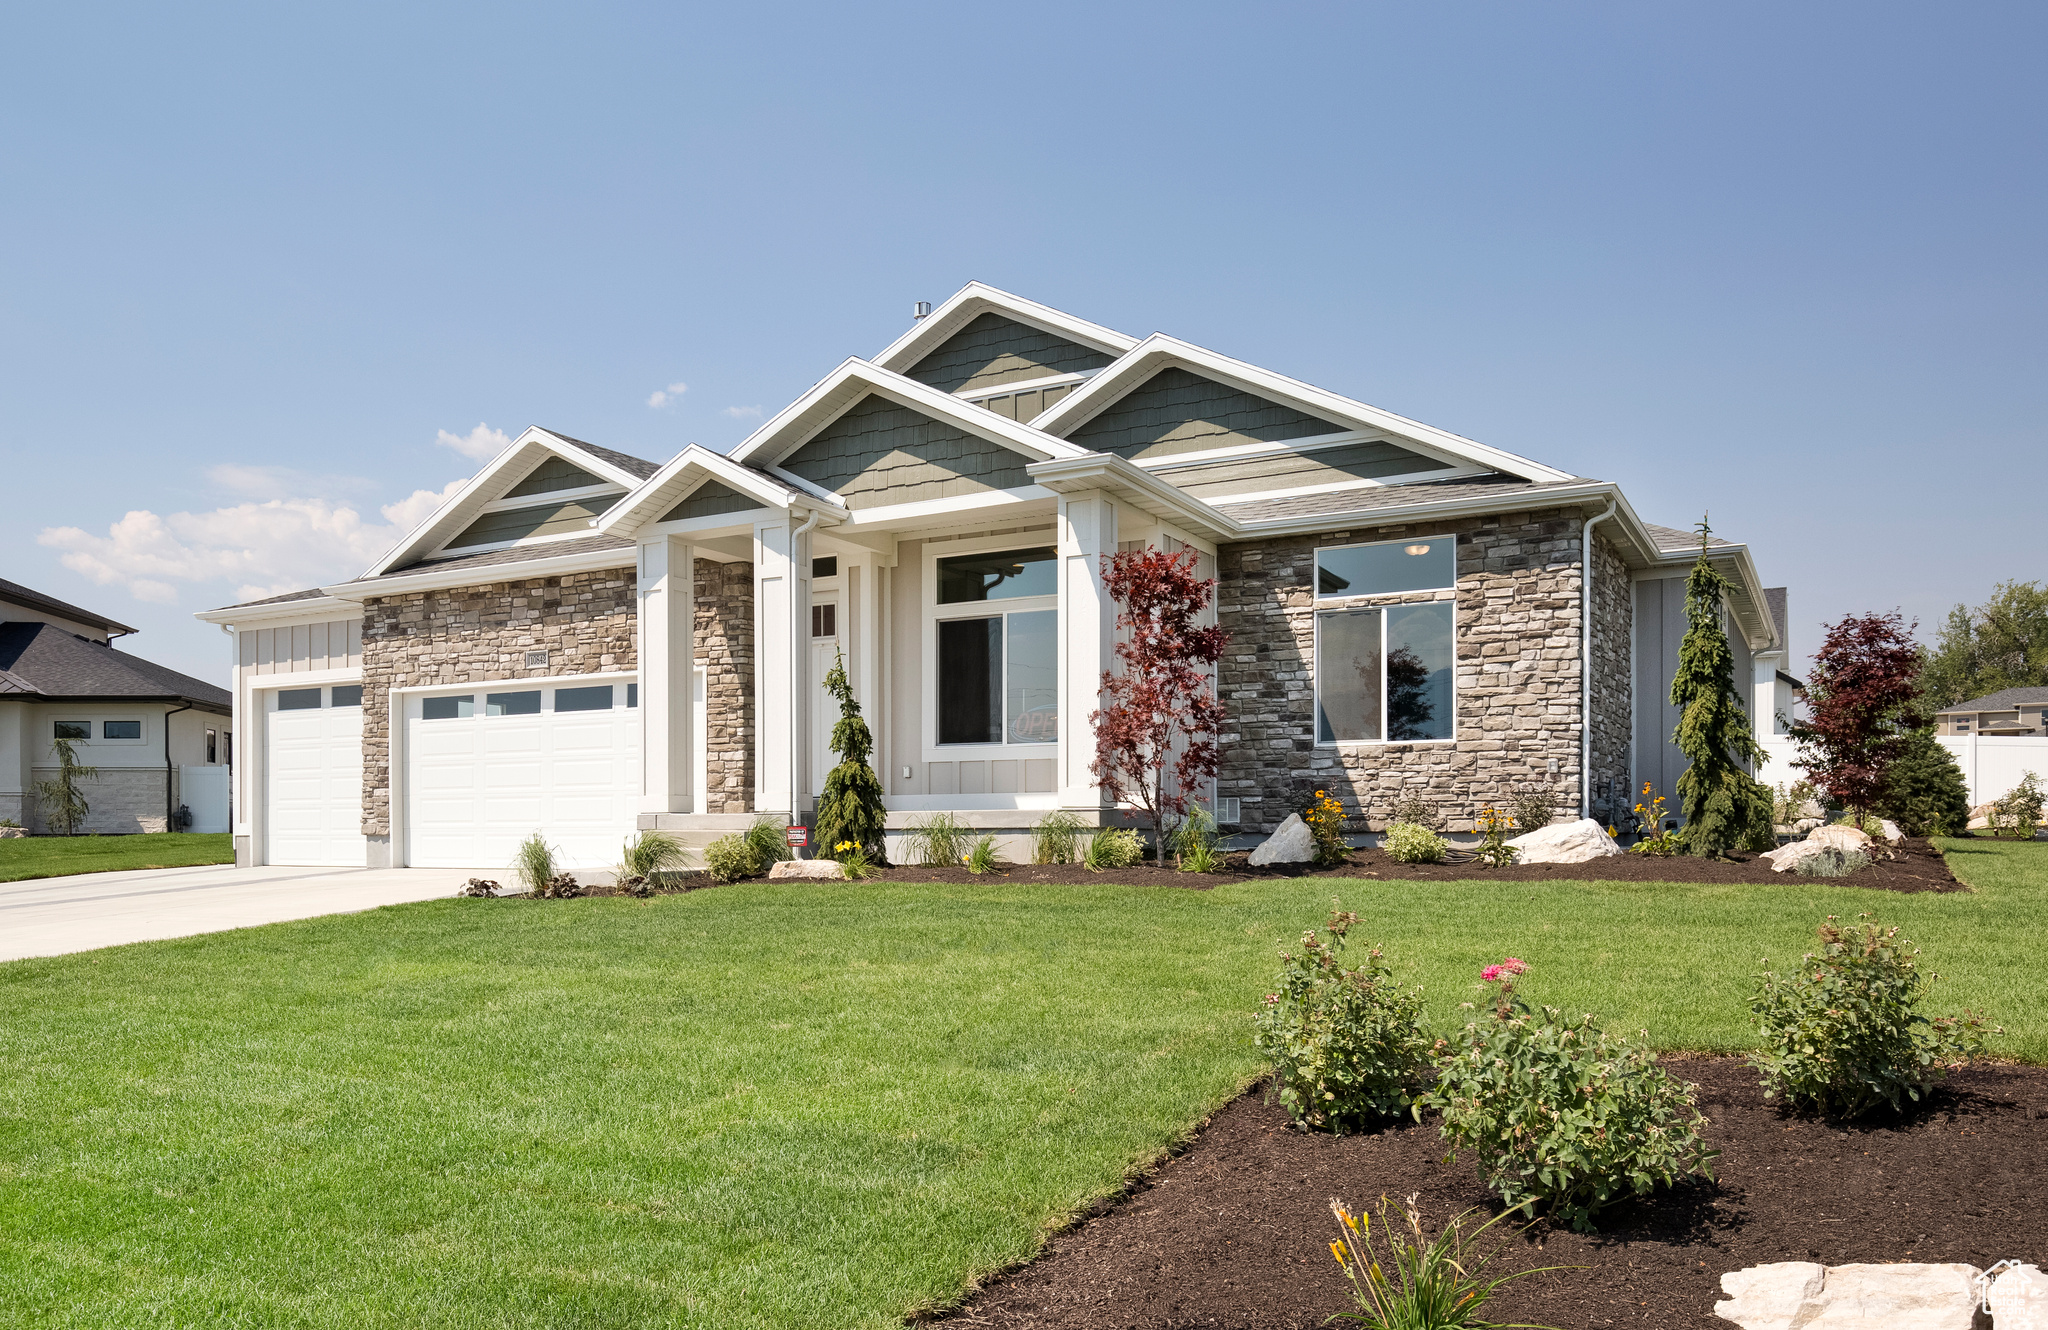 Craftsman inspired home featuring a garage and a front lawn